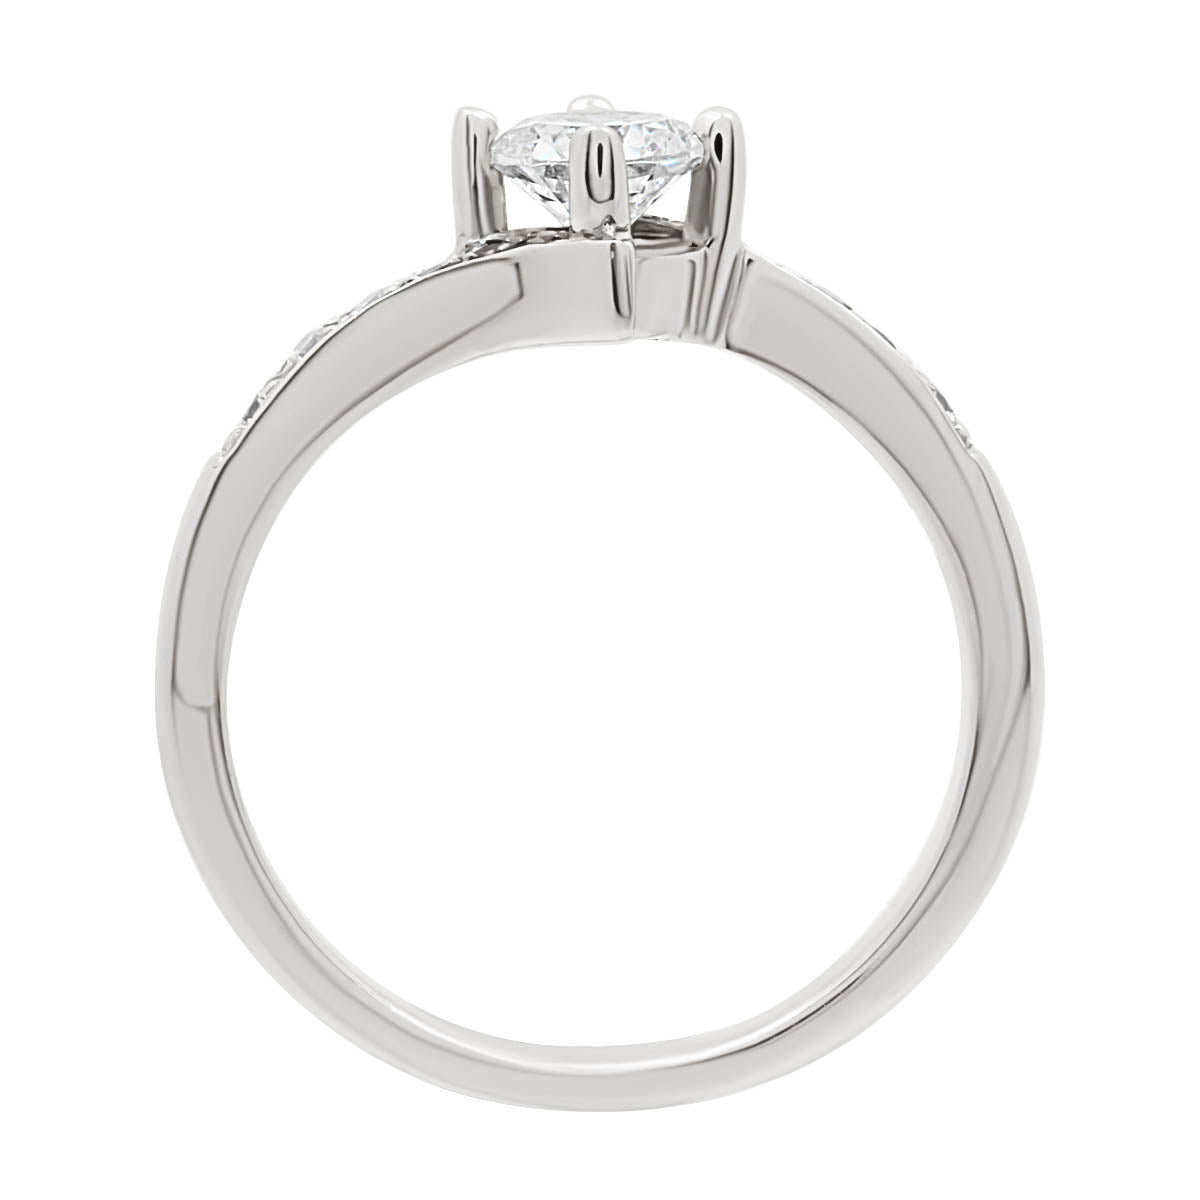 Quirky Diamond Engagement Ring in white gold in an upstanding position